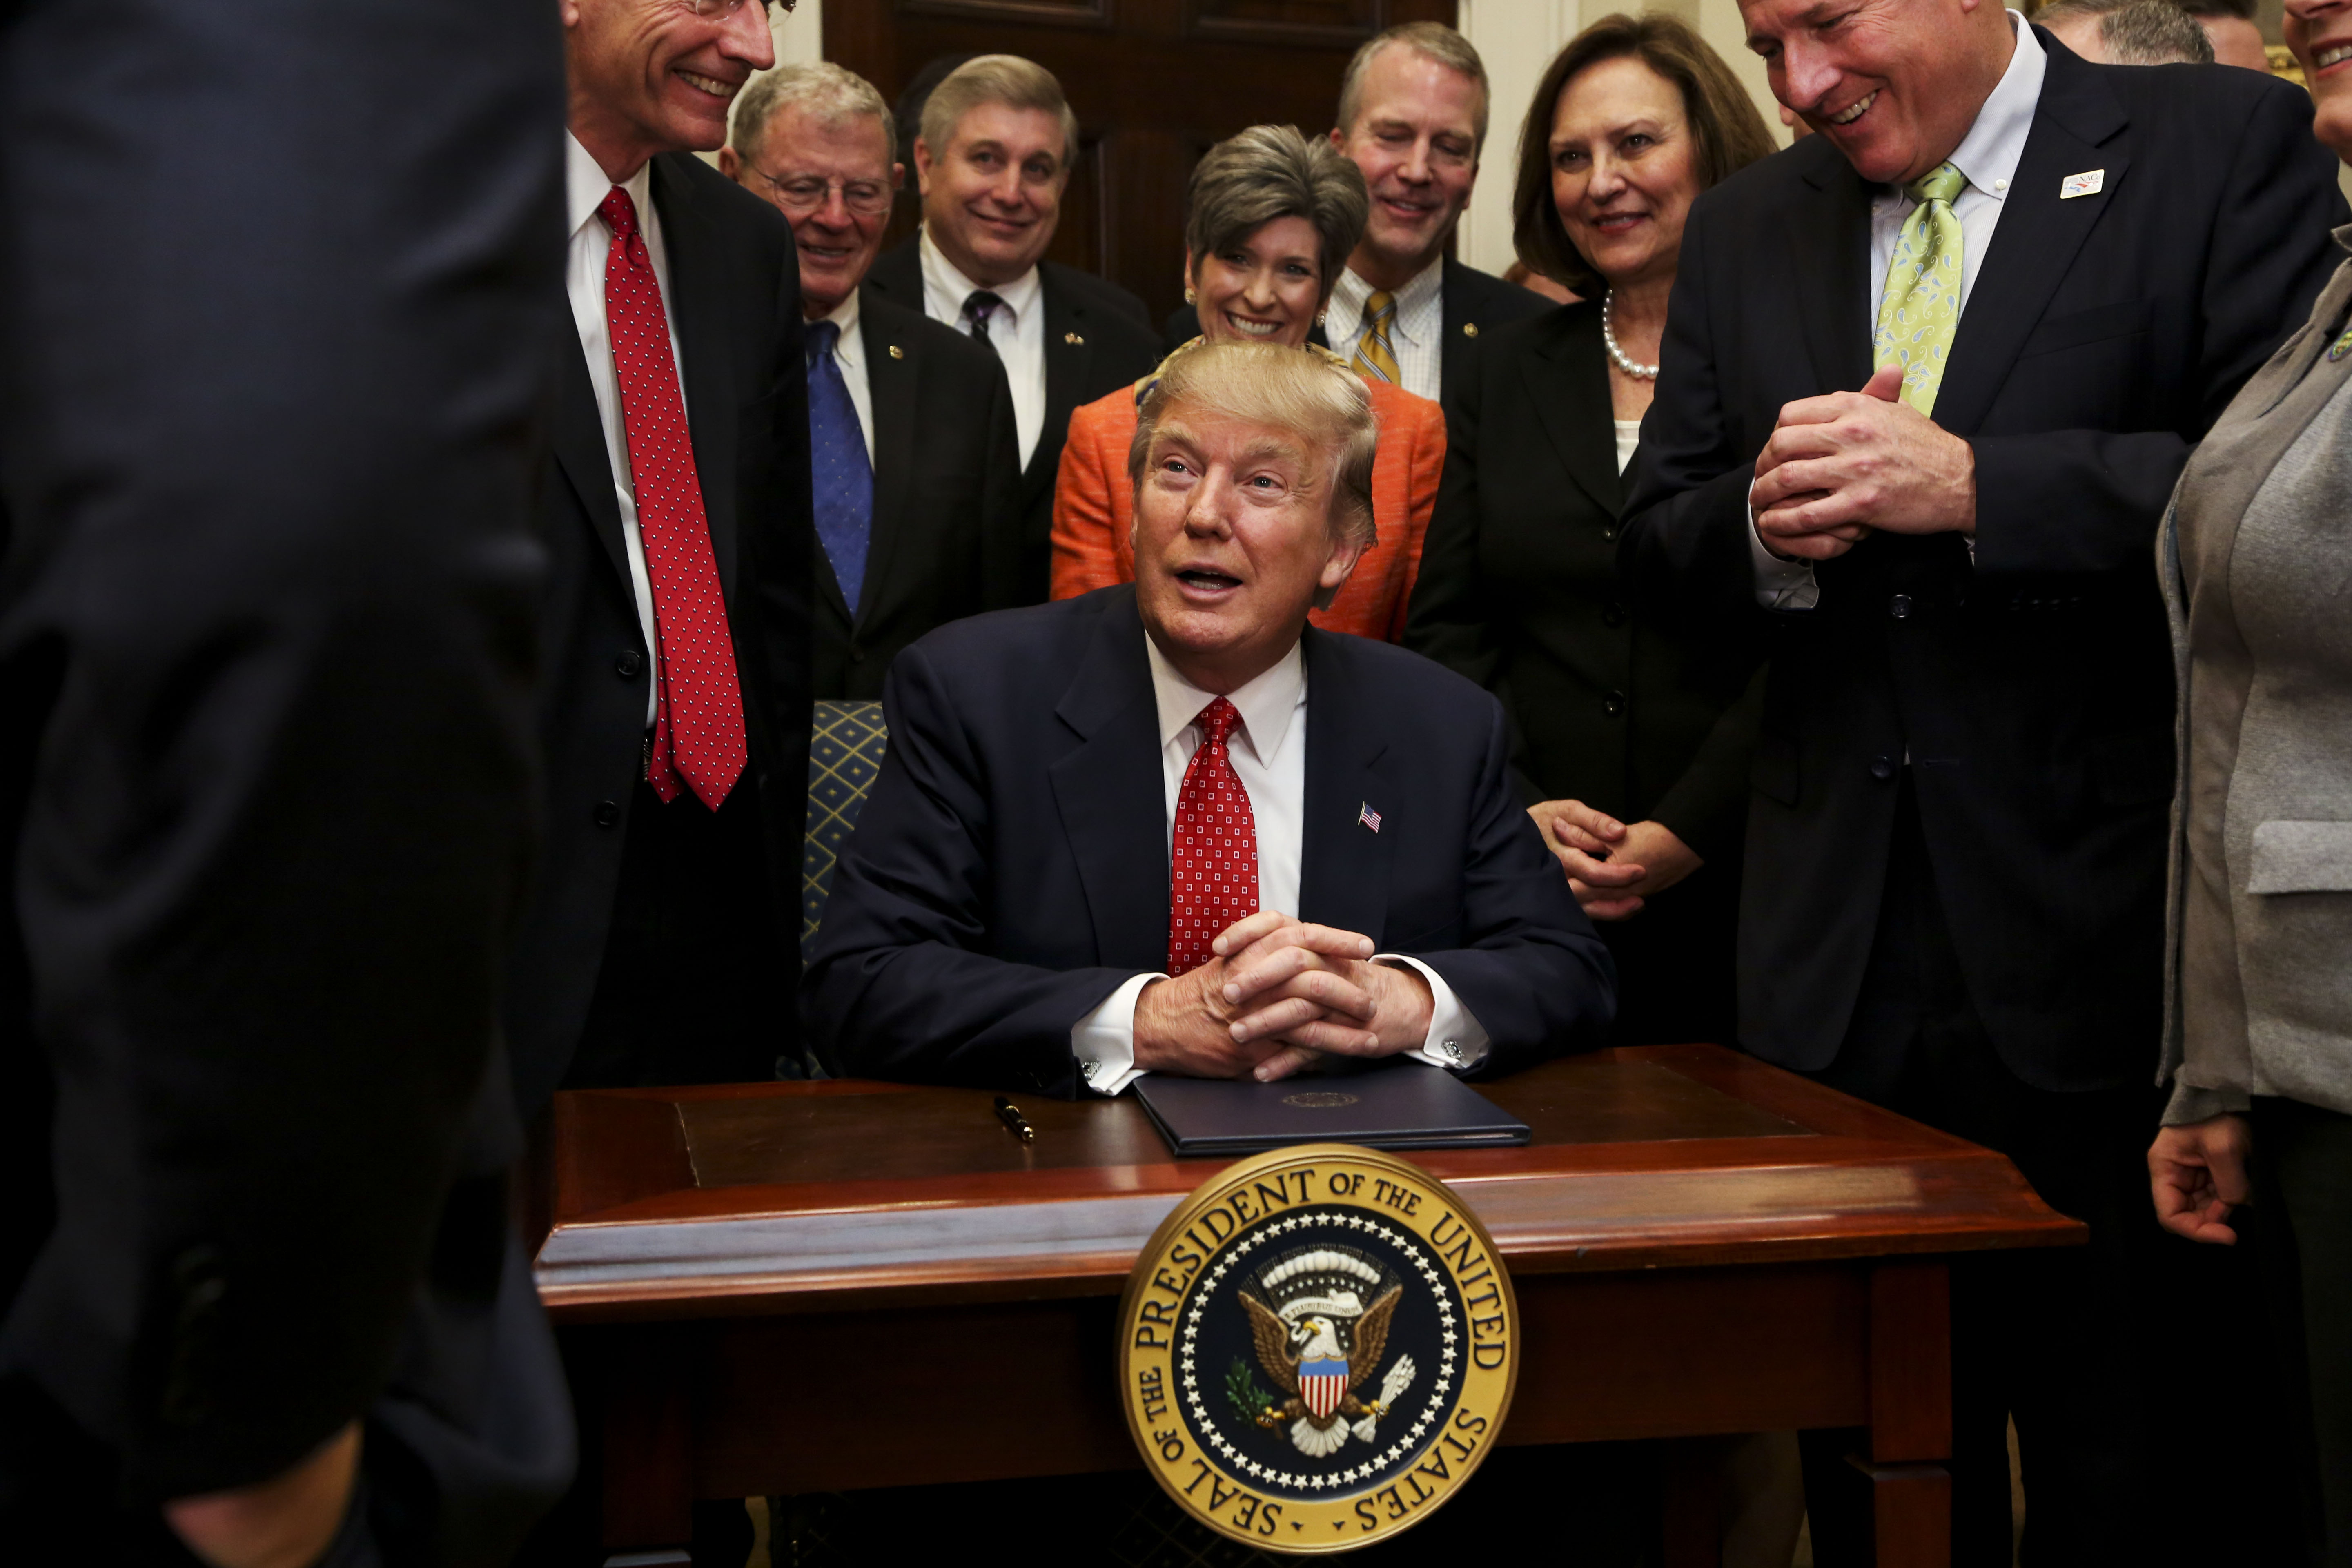 WASHINGTON, D.C. - FEBRUARY 28: President Donald Trump speaks before signing an Executive Order to begin the roll-back of environmental regulations put in place by the Obama administration February 28, 2017 in the Roosevelt Room of the White House in Washington, D.C. The Clean Water Rule, also known as WOTUS, the Waters of the U.S. rule, has been unpopular with some farmers, housing developers and energy companies. (Photo by Aude Guerrucci-Pool/Getty Images)